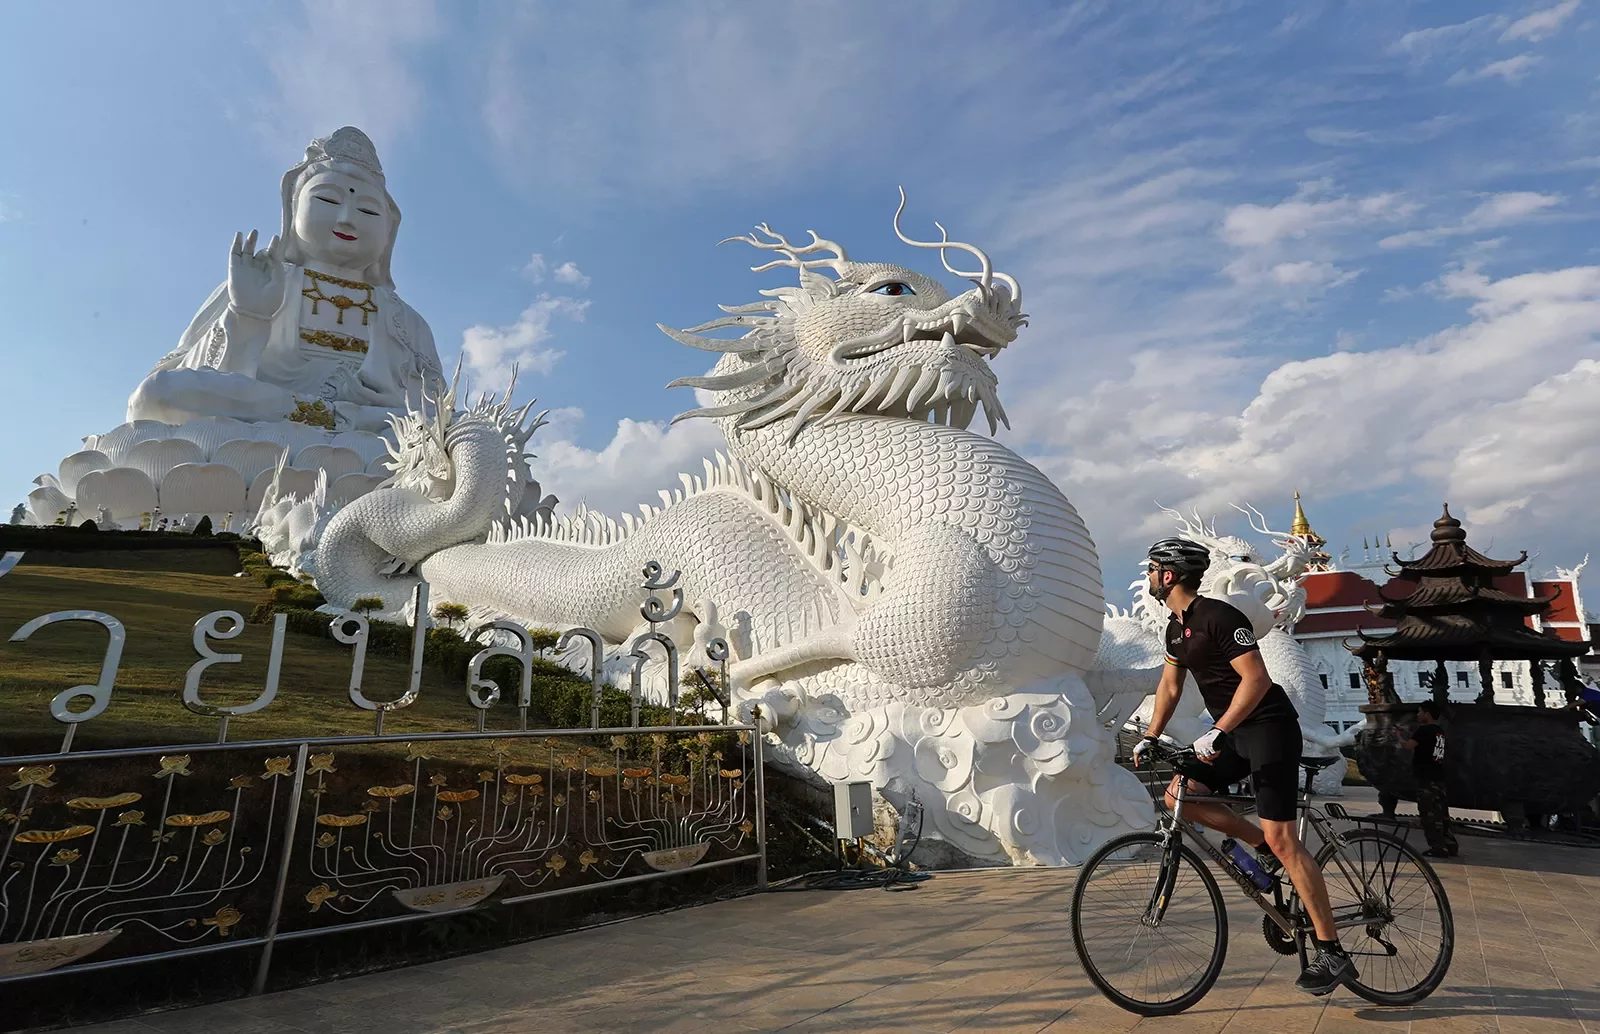 Backroads guest in front of a dragon statue in Thailand